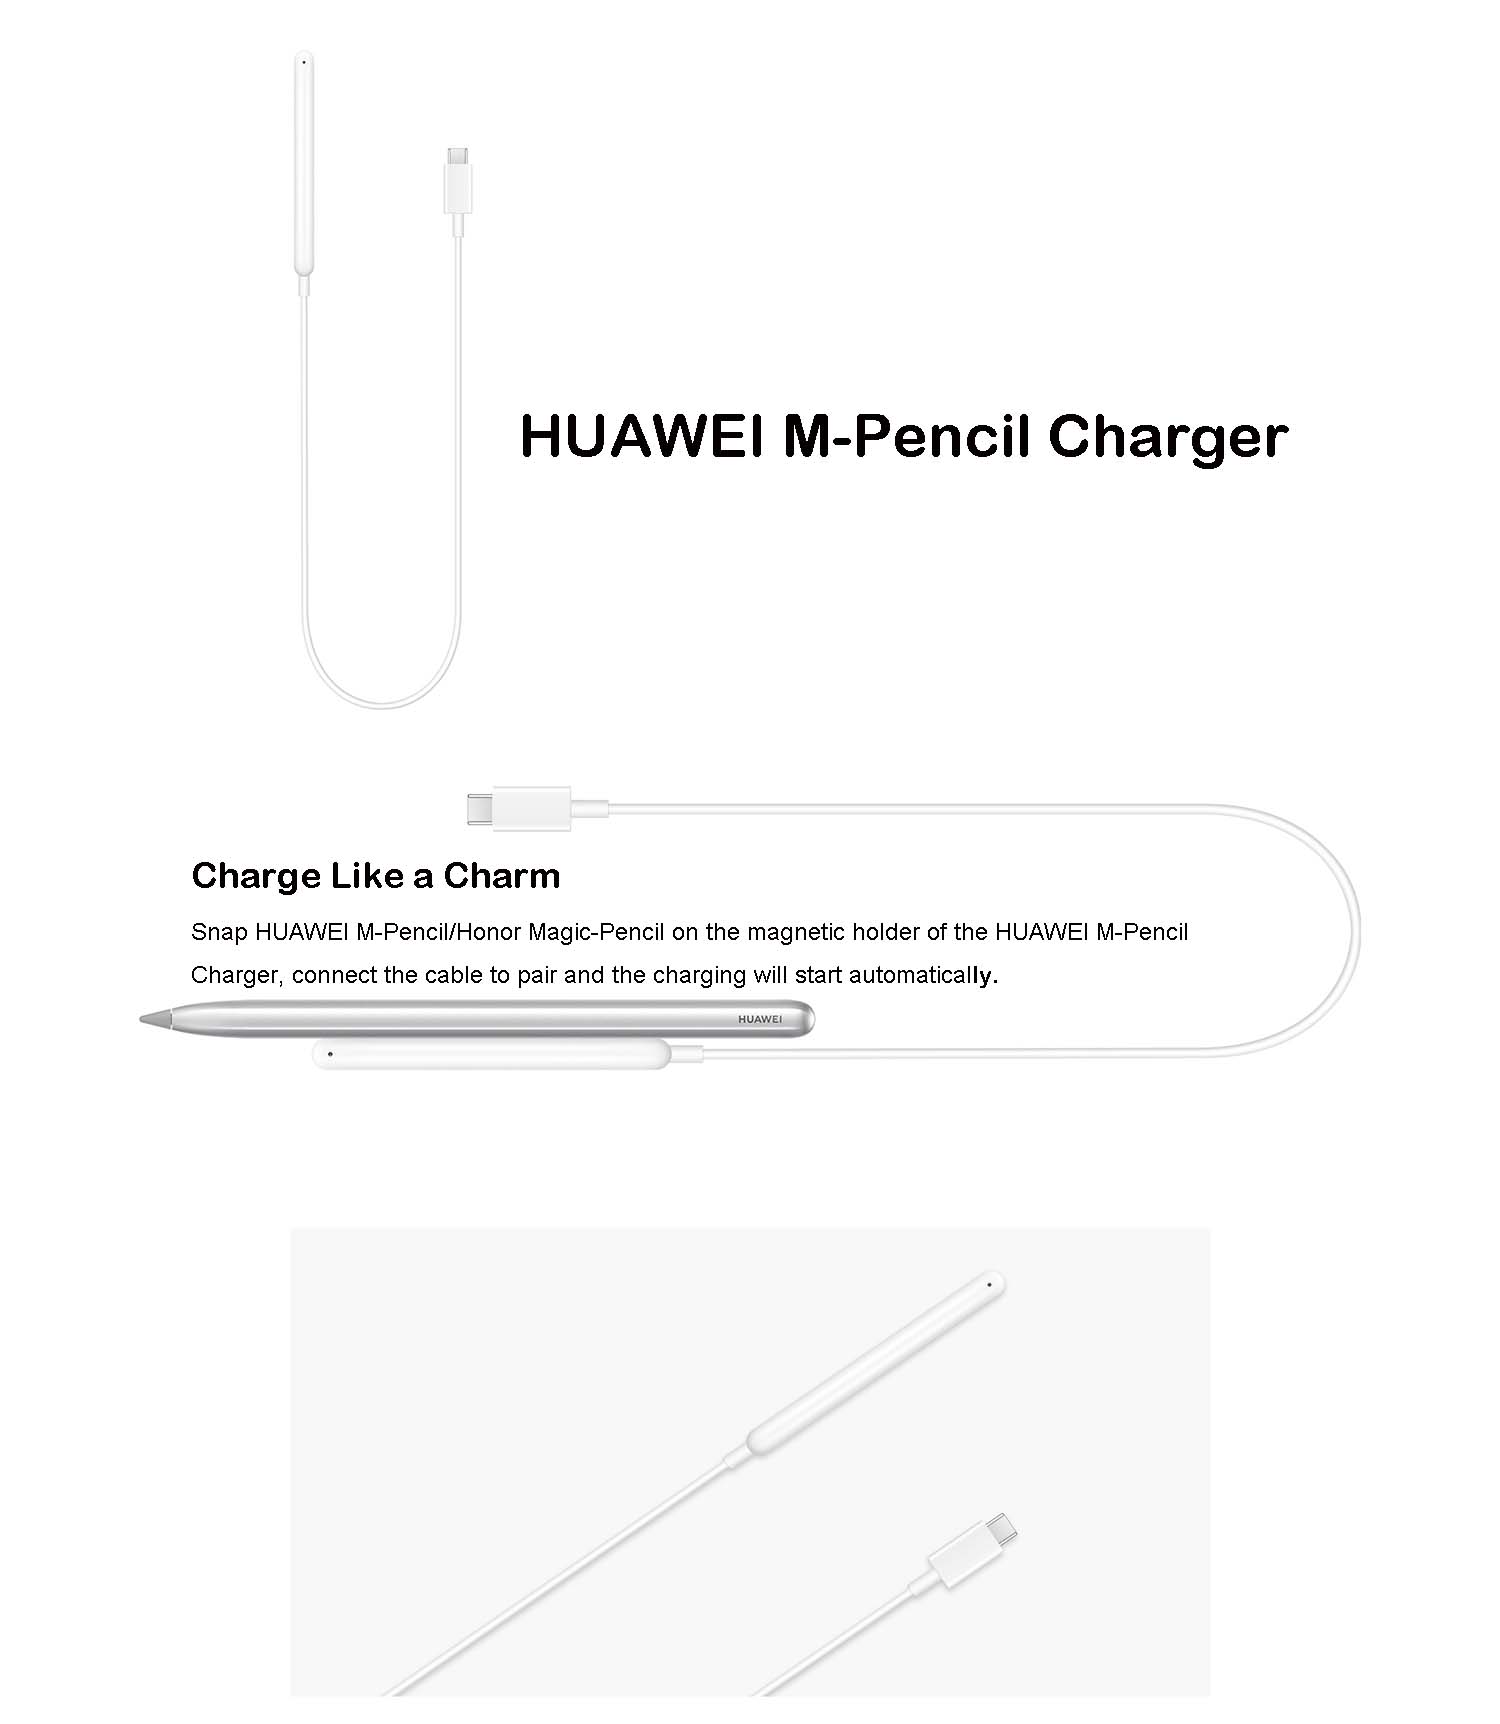 HUAWEI M-Pencil Charger